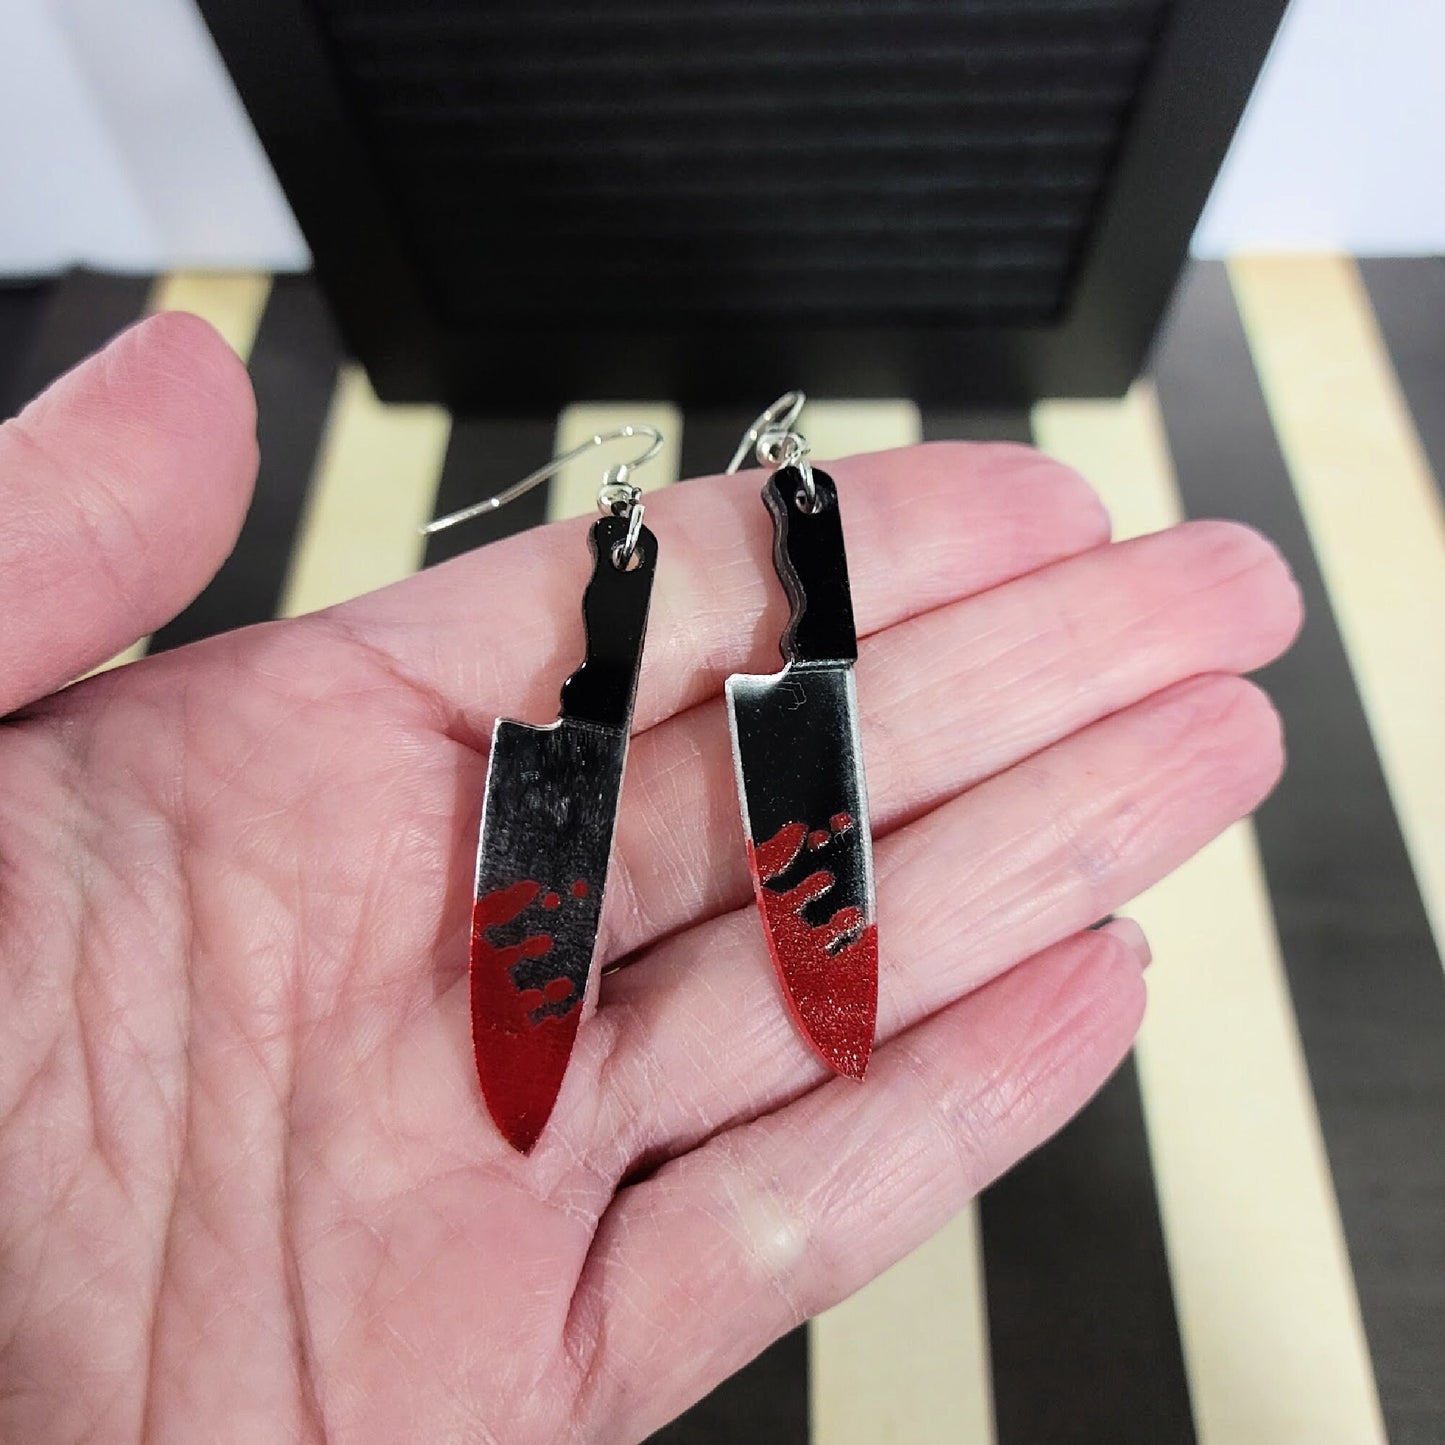 Bloody Knife Earrings | Halloween Horror Jewelry | Valentine's Day Massacre Gift | Gothic Style